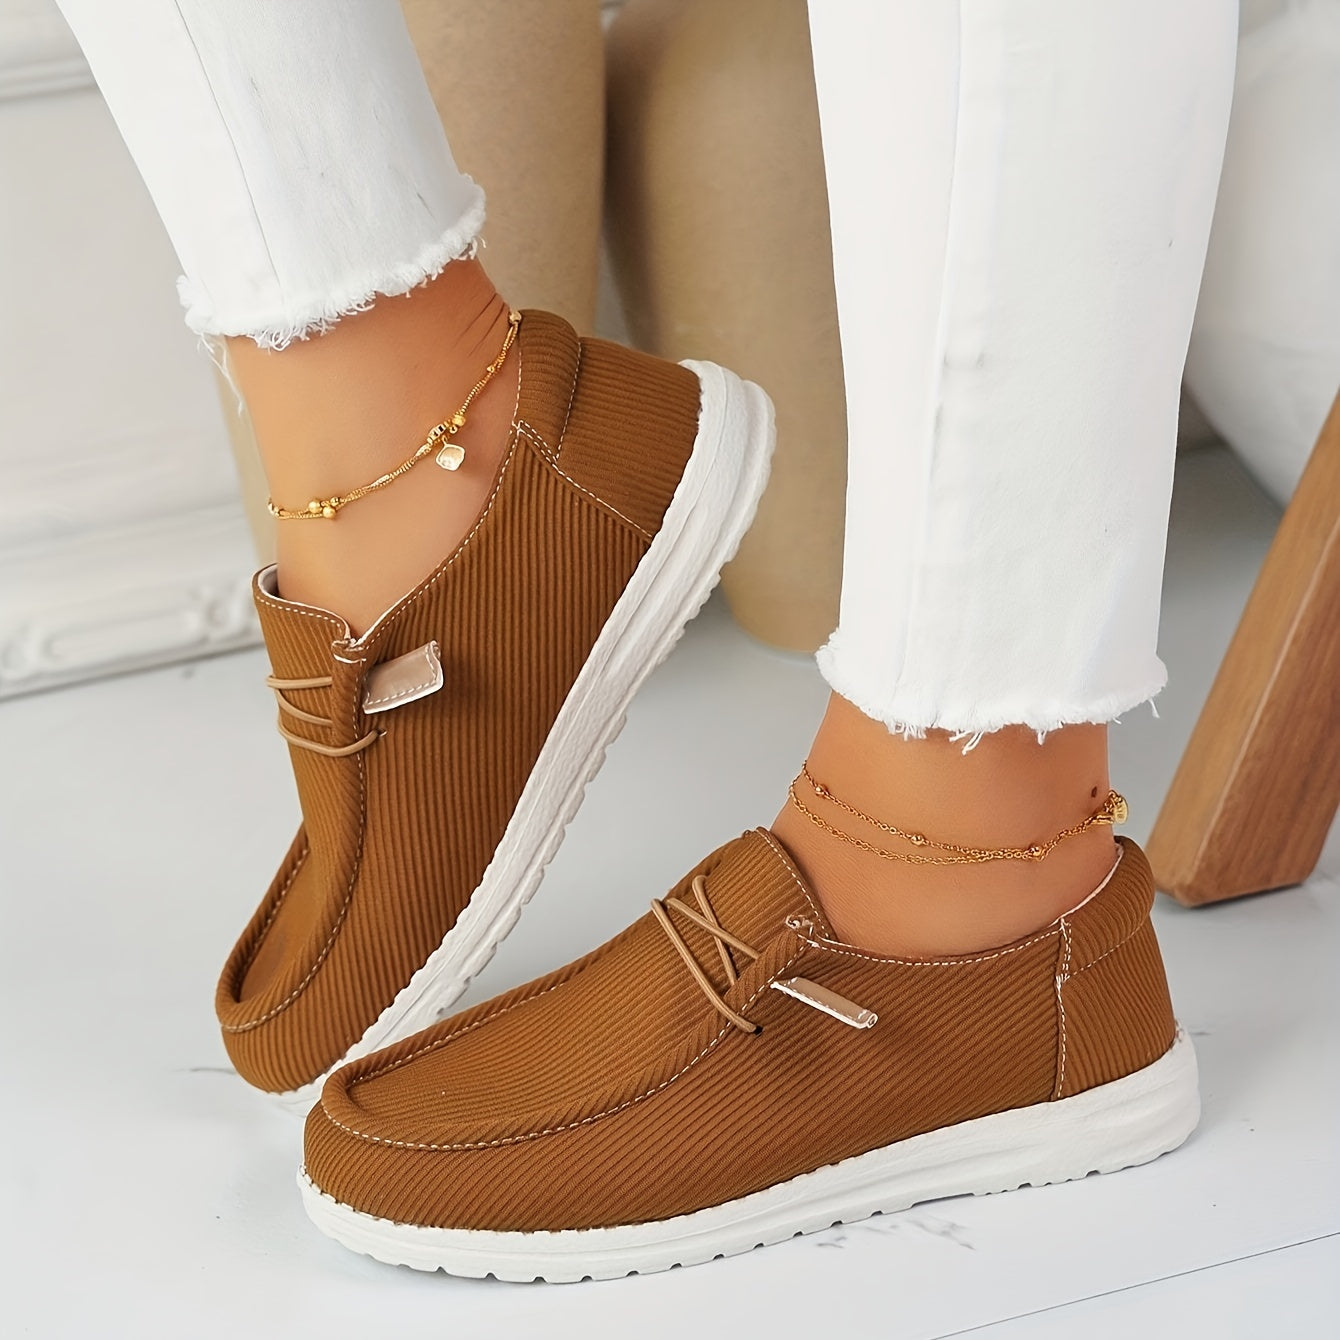 Solid Color Canvas Shoes, Round Toe Lace Up Loafers